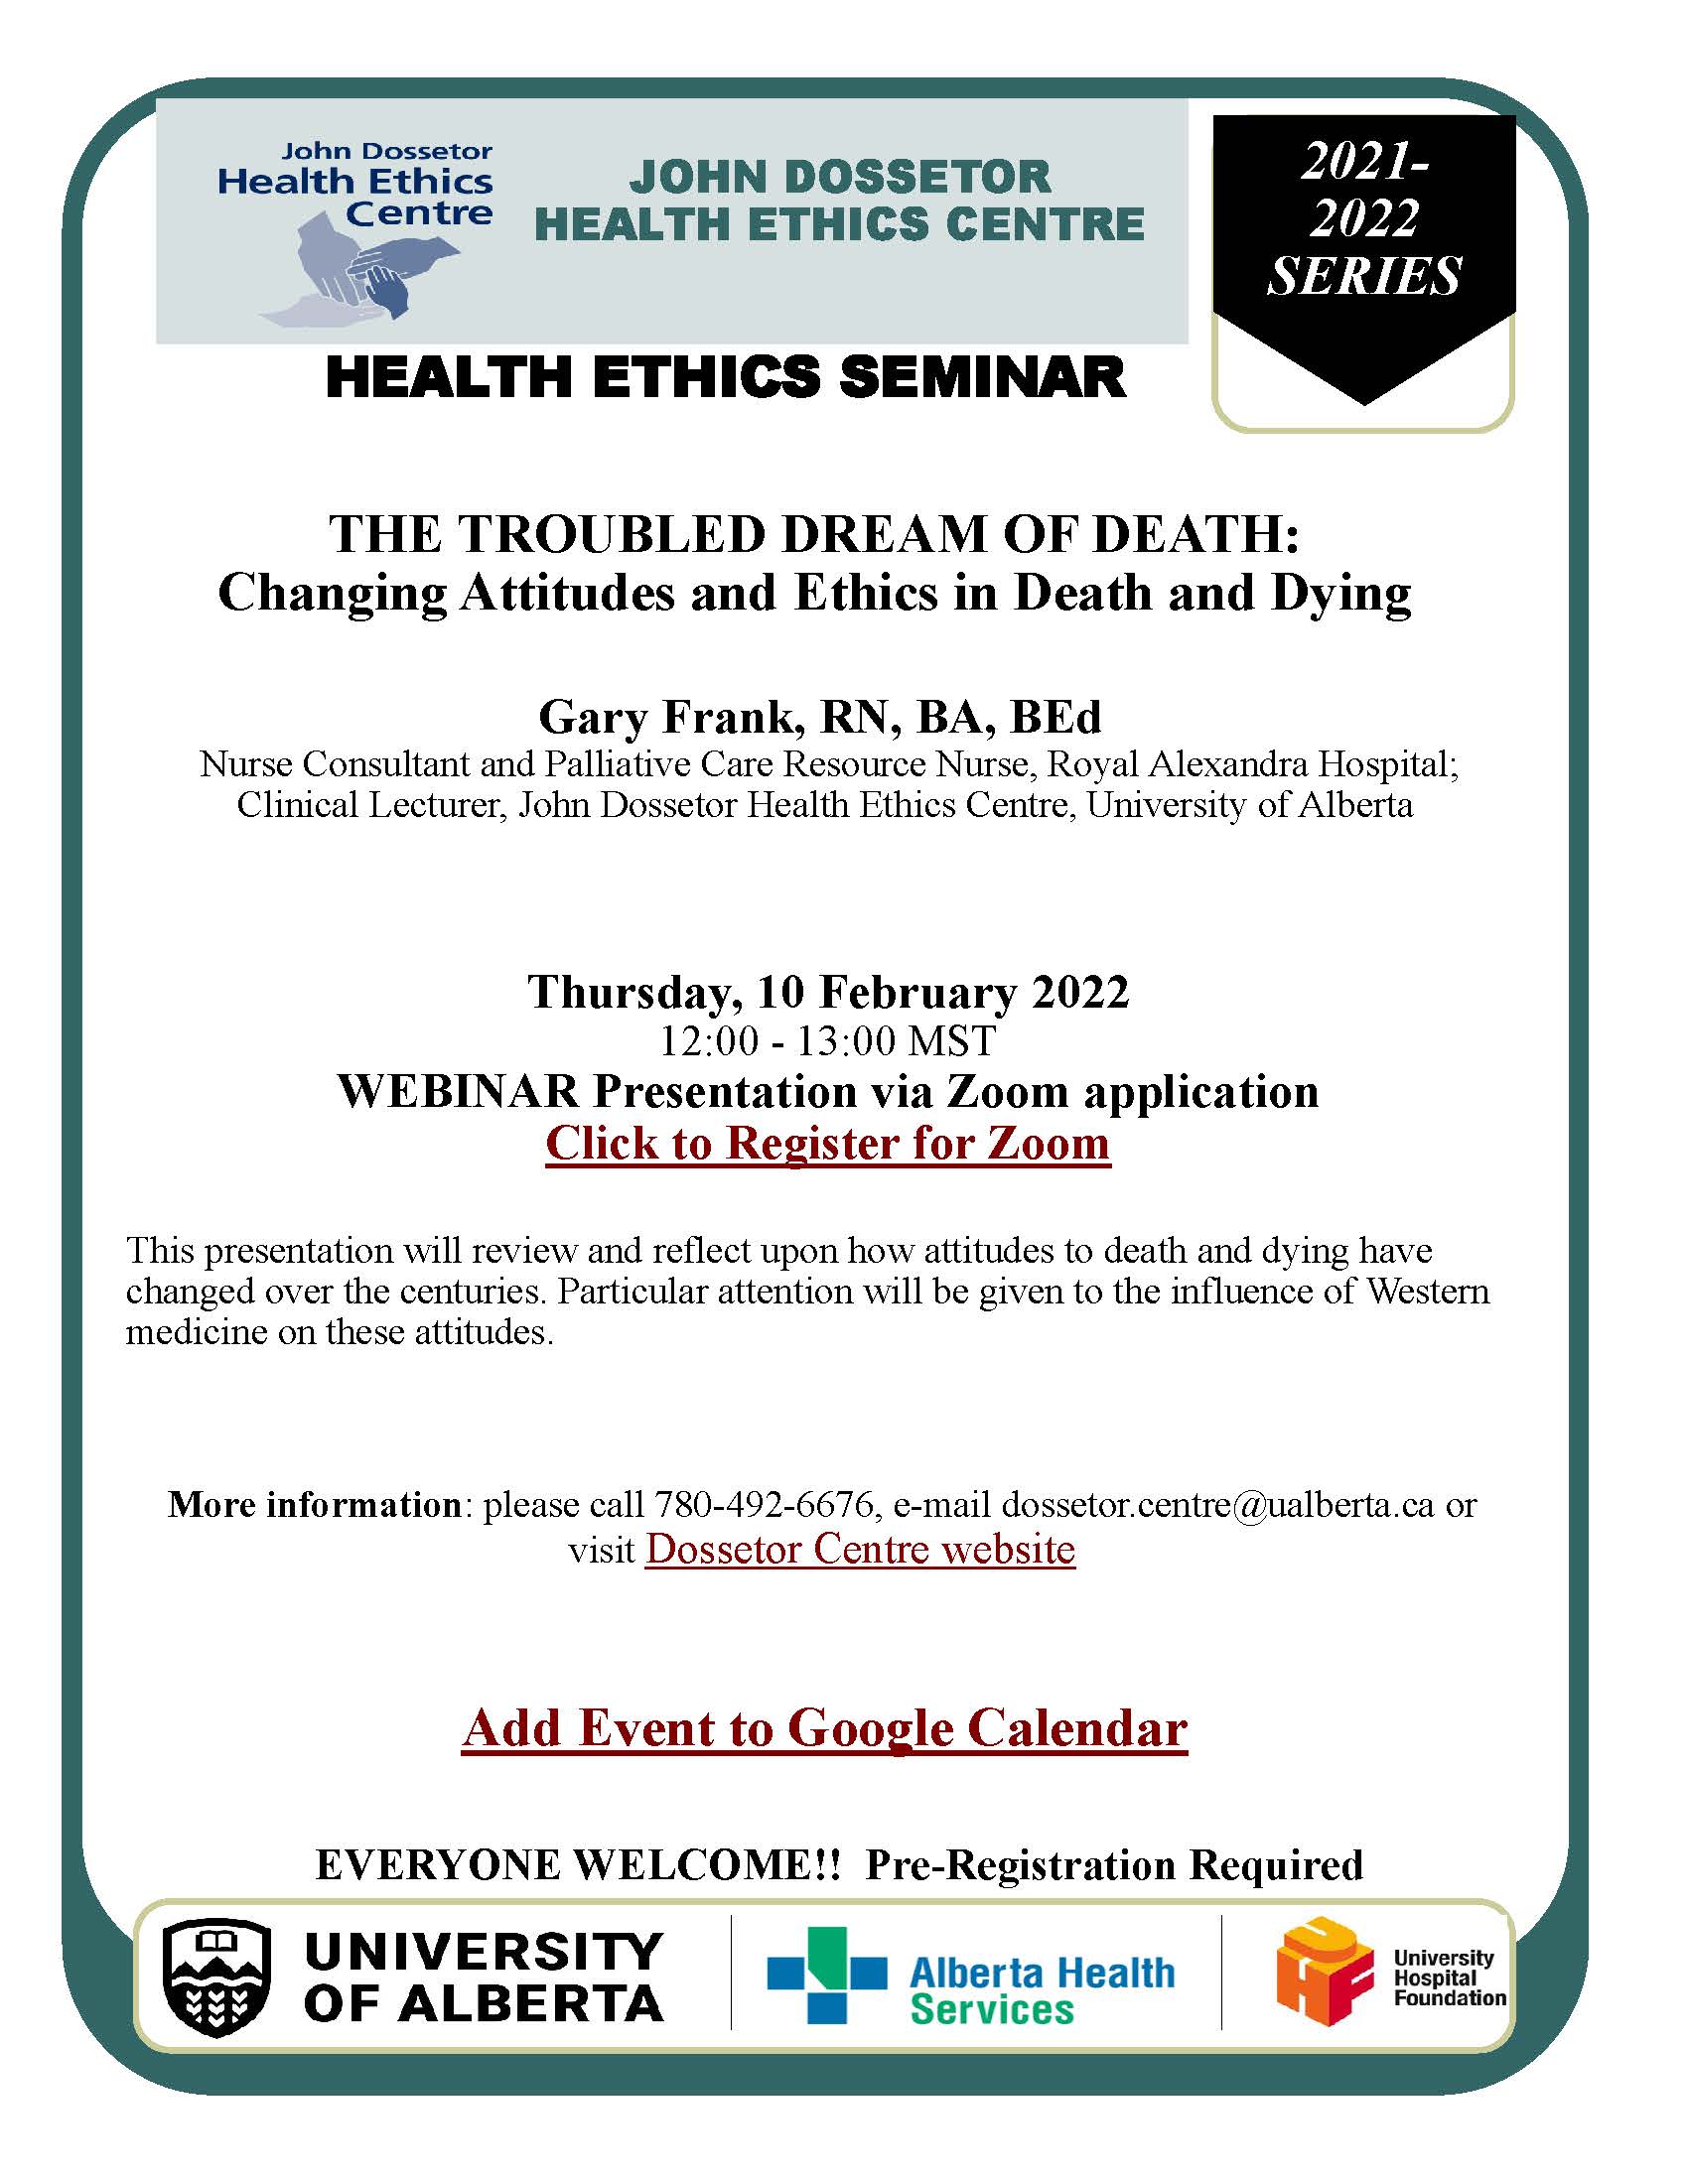 Mst Schedule 2022 Dossetor Centre On Twitter: "Mark Your Calendars - 10 February 2022 At Noon  (Mst), Health Ethics Seminar The Troubled Dream Of Death: Changing  Attitudes And Ethics In Death And Dying Https://T.co/Wtg7Pldato  Https://T.co/Nlaf0Lgjtz" /